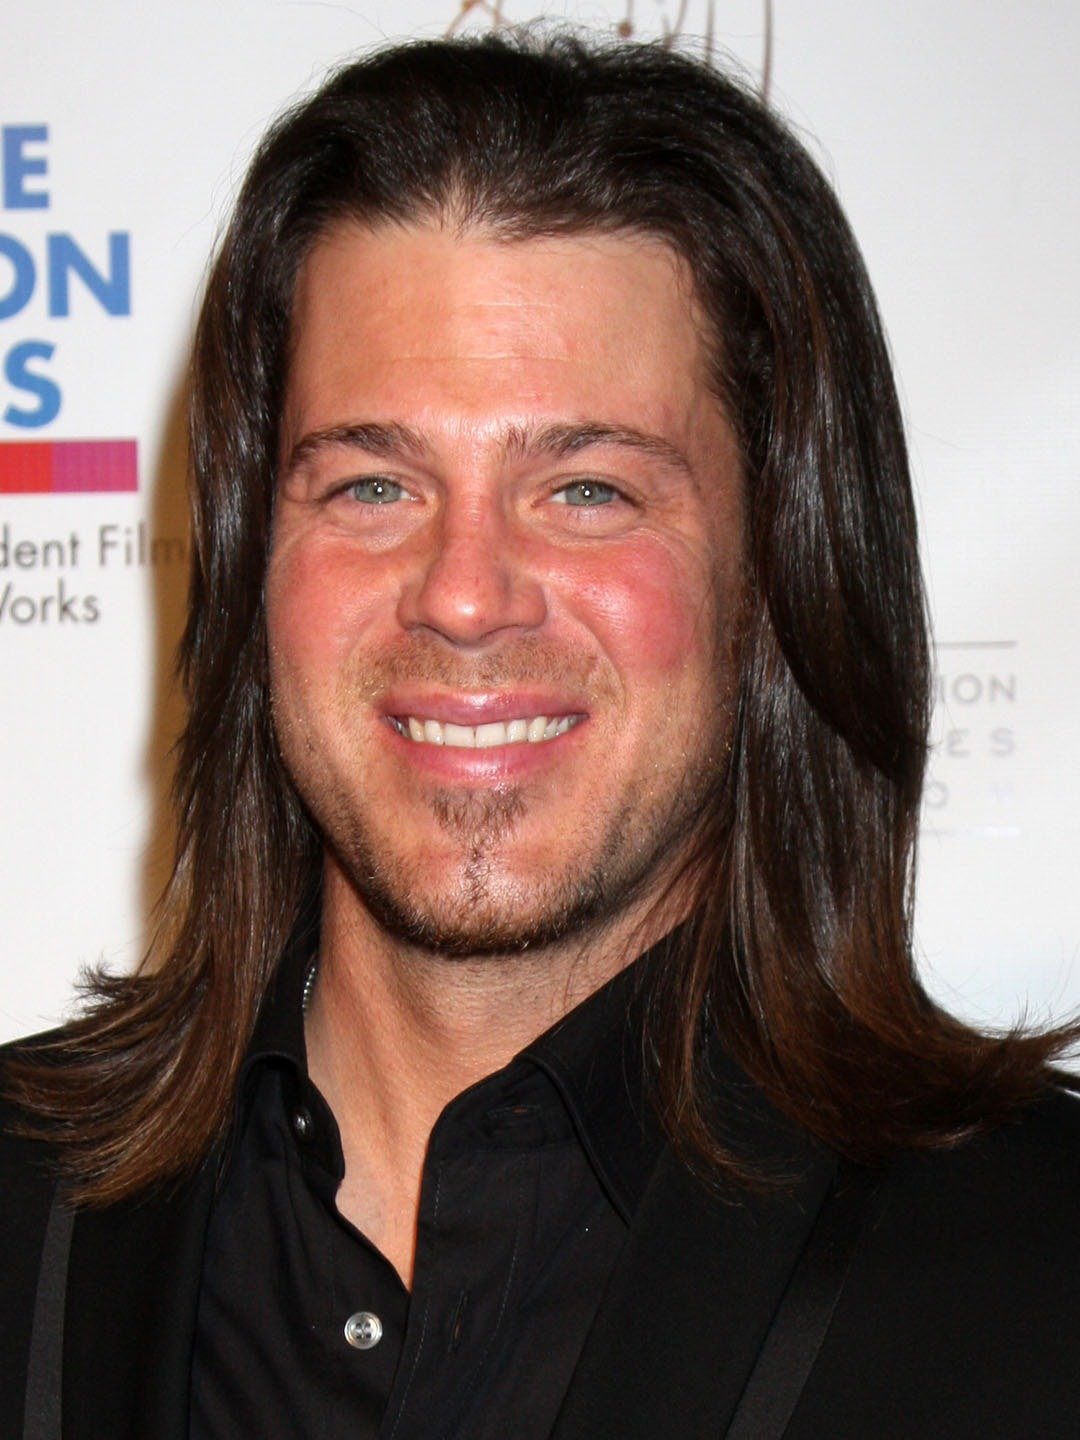 How tall is Christian Kane?